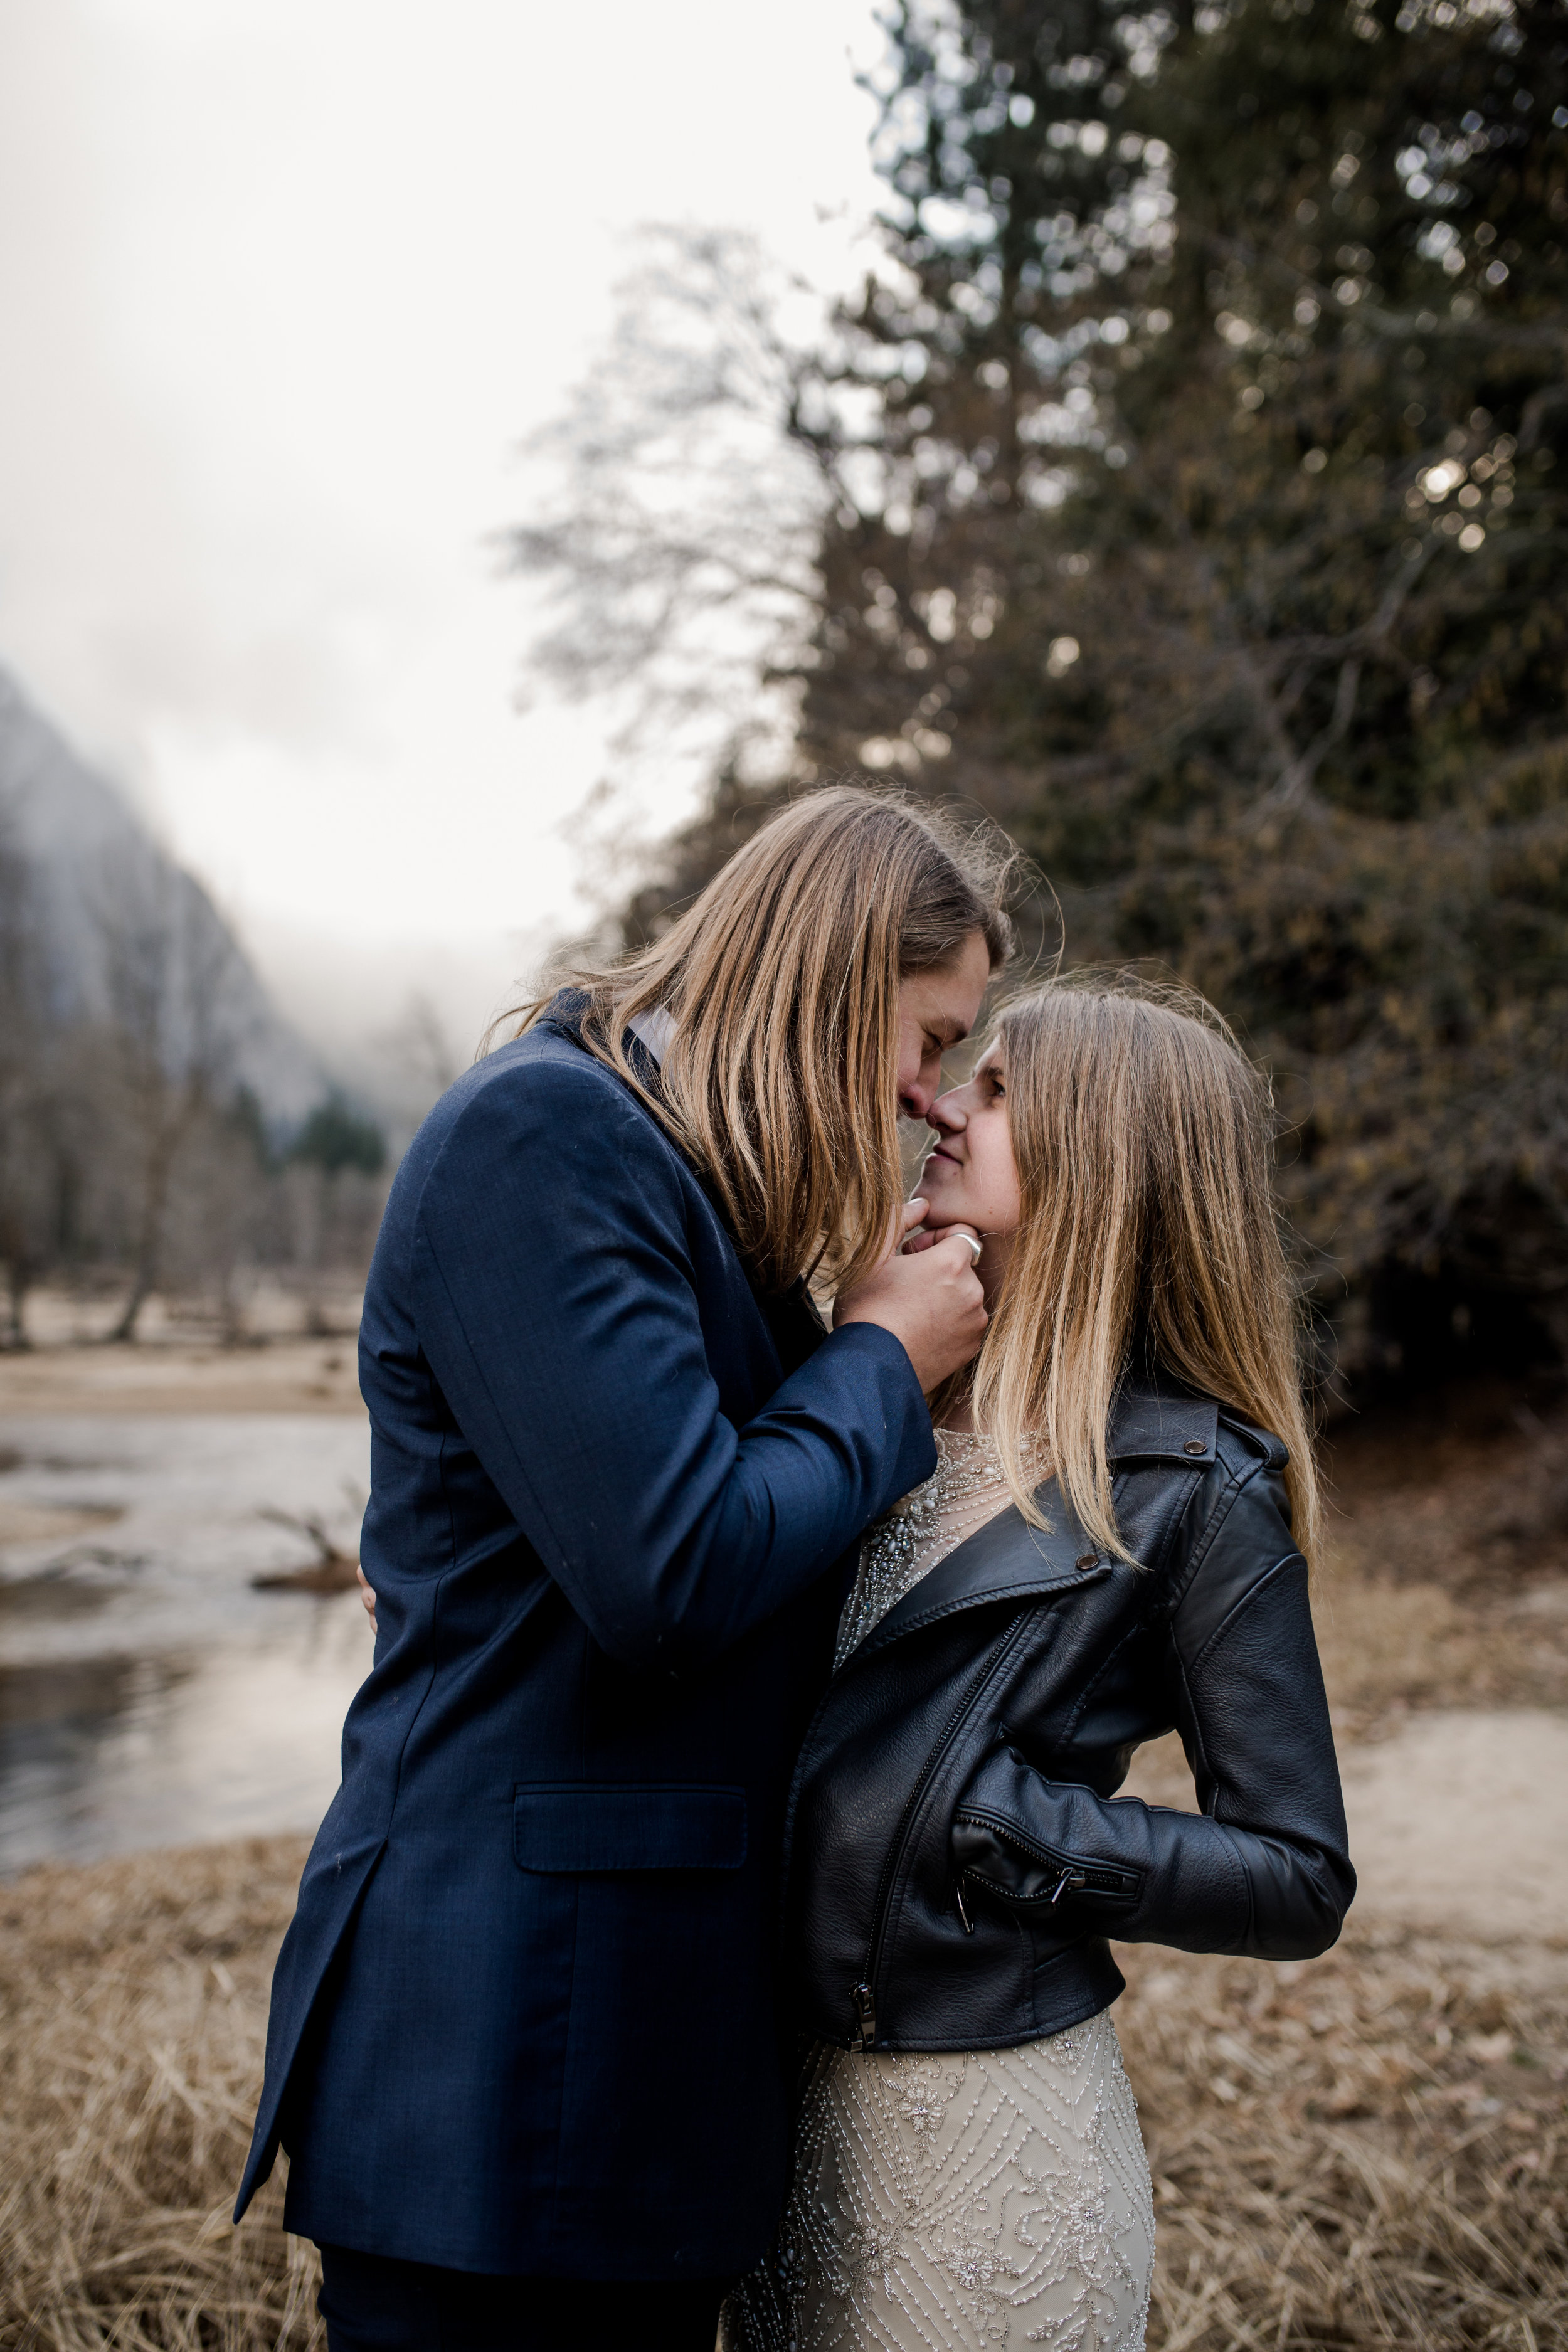 nicole-daacke-photography-yousemite-national-park-elopement-photographer-winter-cloud-moody-elope-inspiration-yosemite-valley-tunnel-view-winter-cloud-fog-weather-wedding-photos-52.jpg